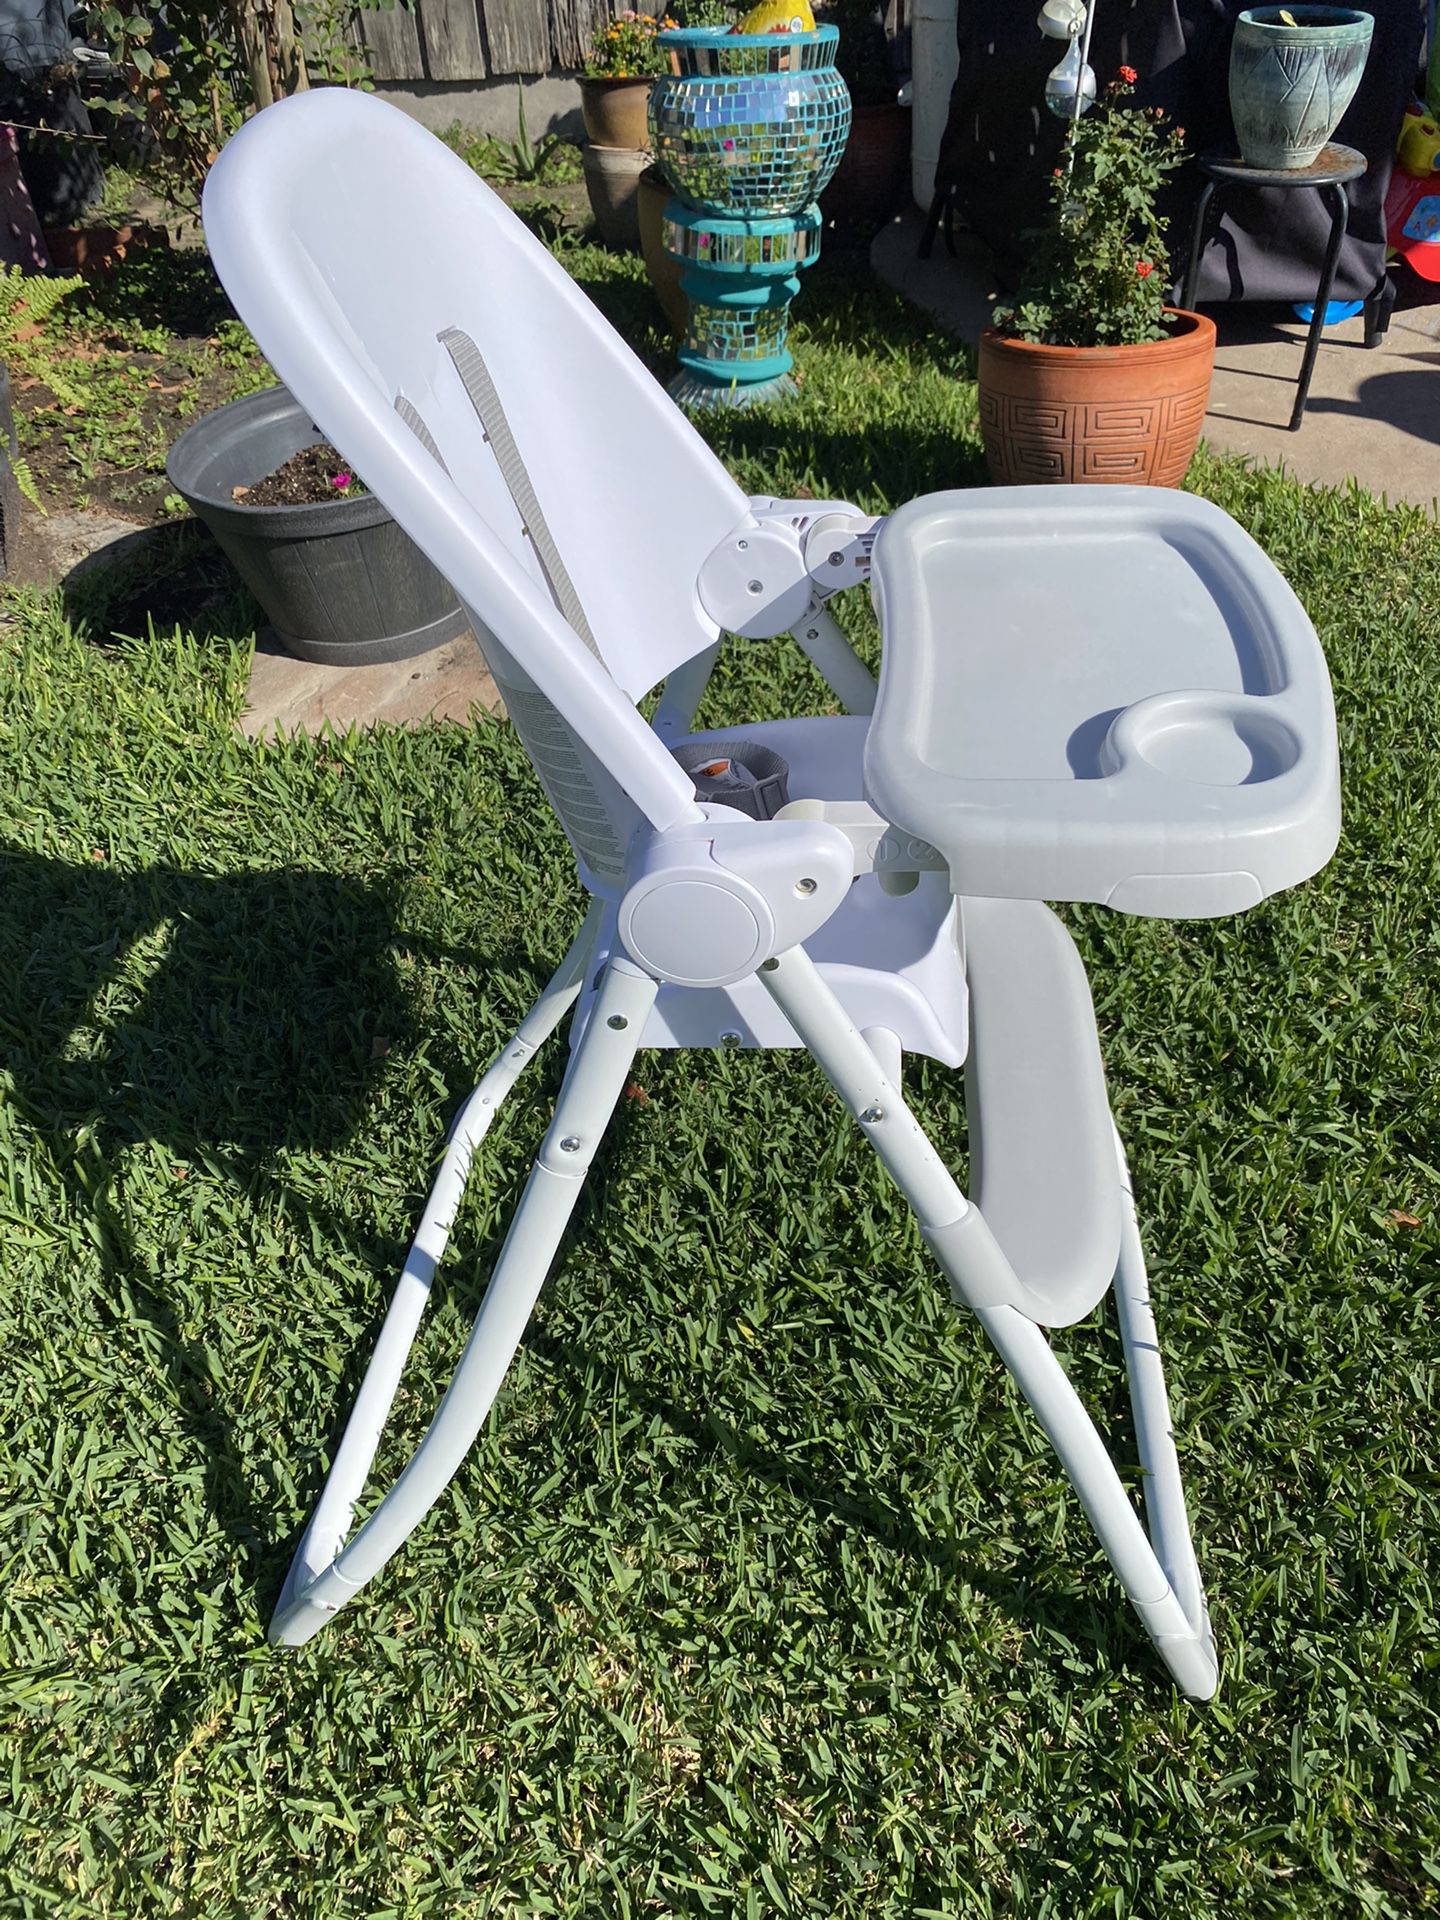 Full size & portable high chair